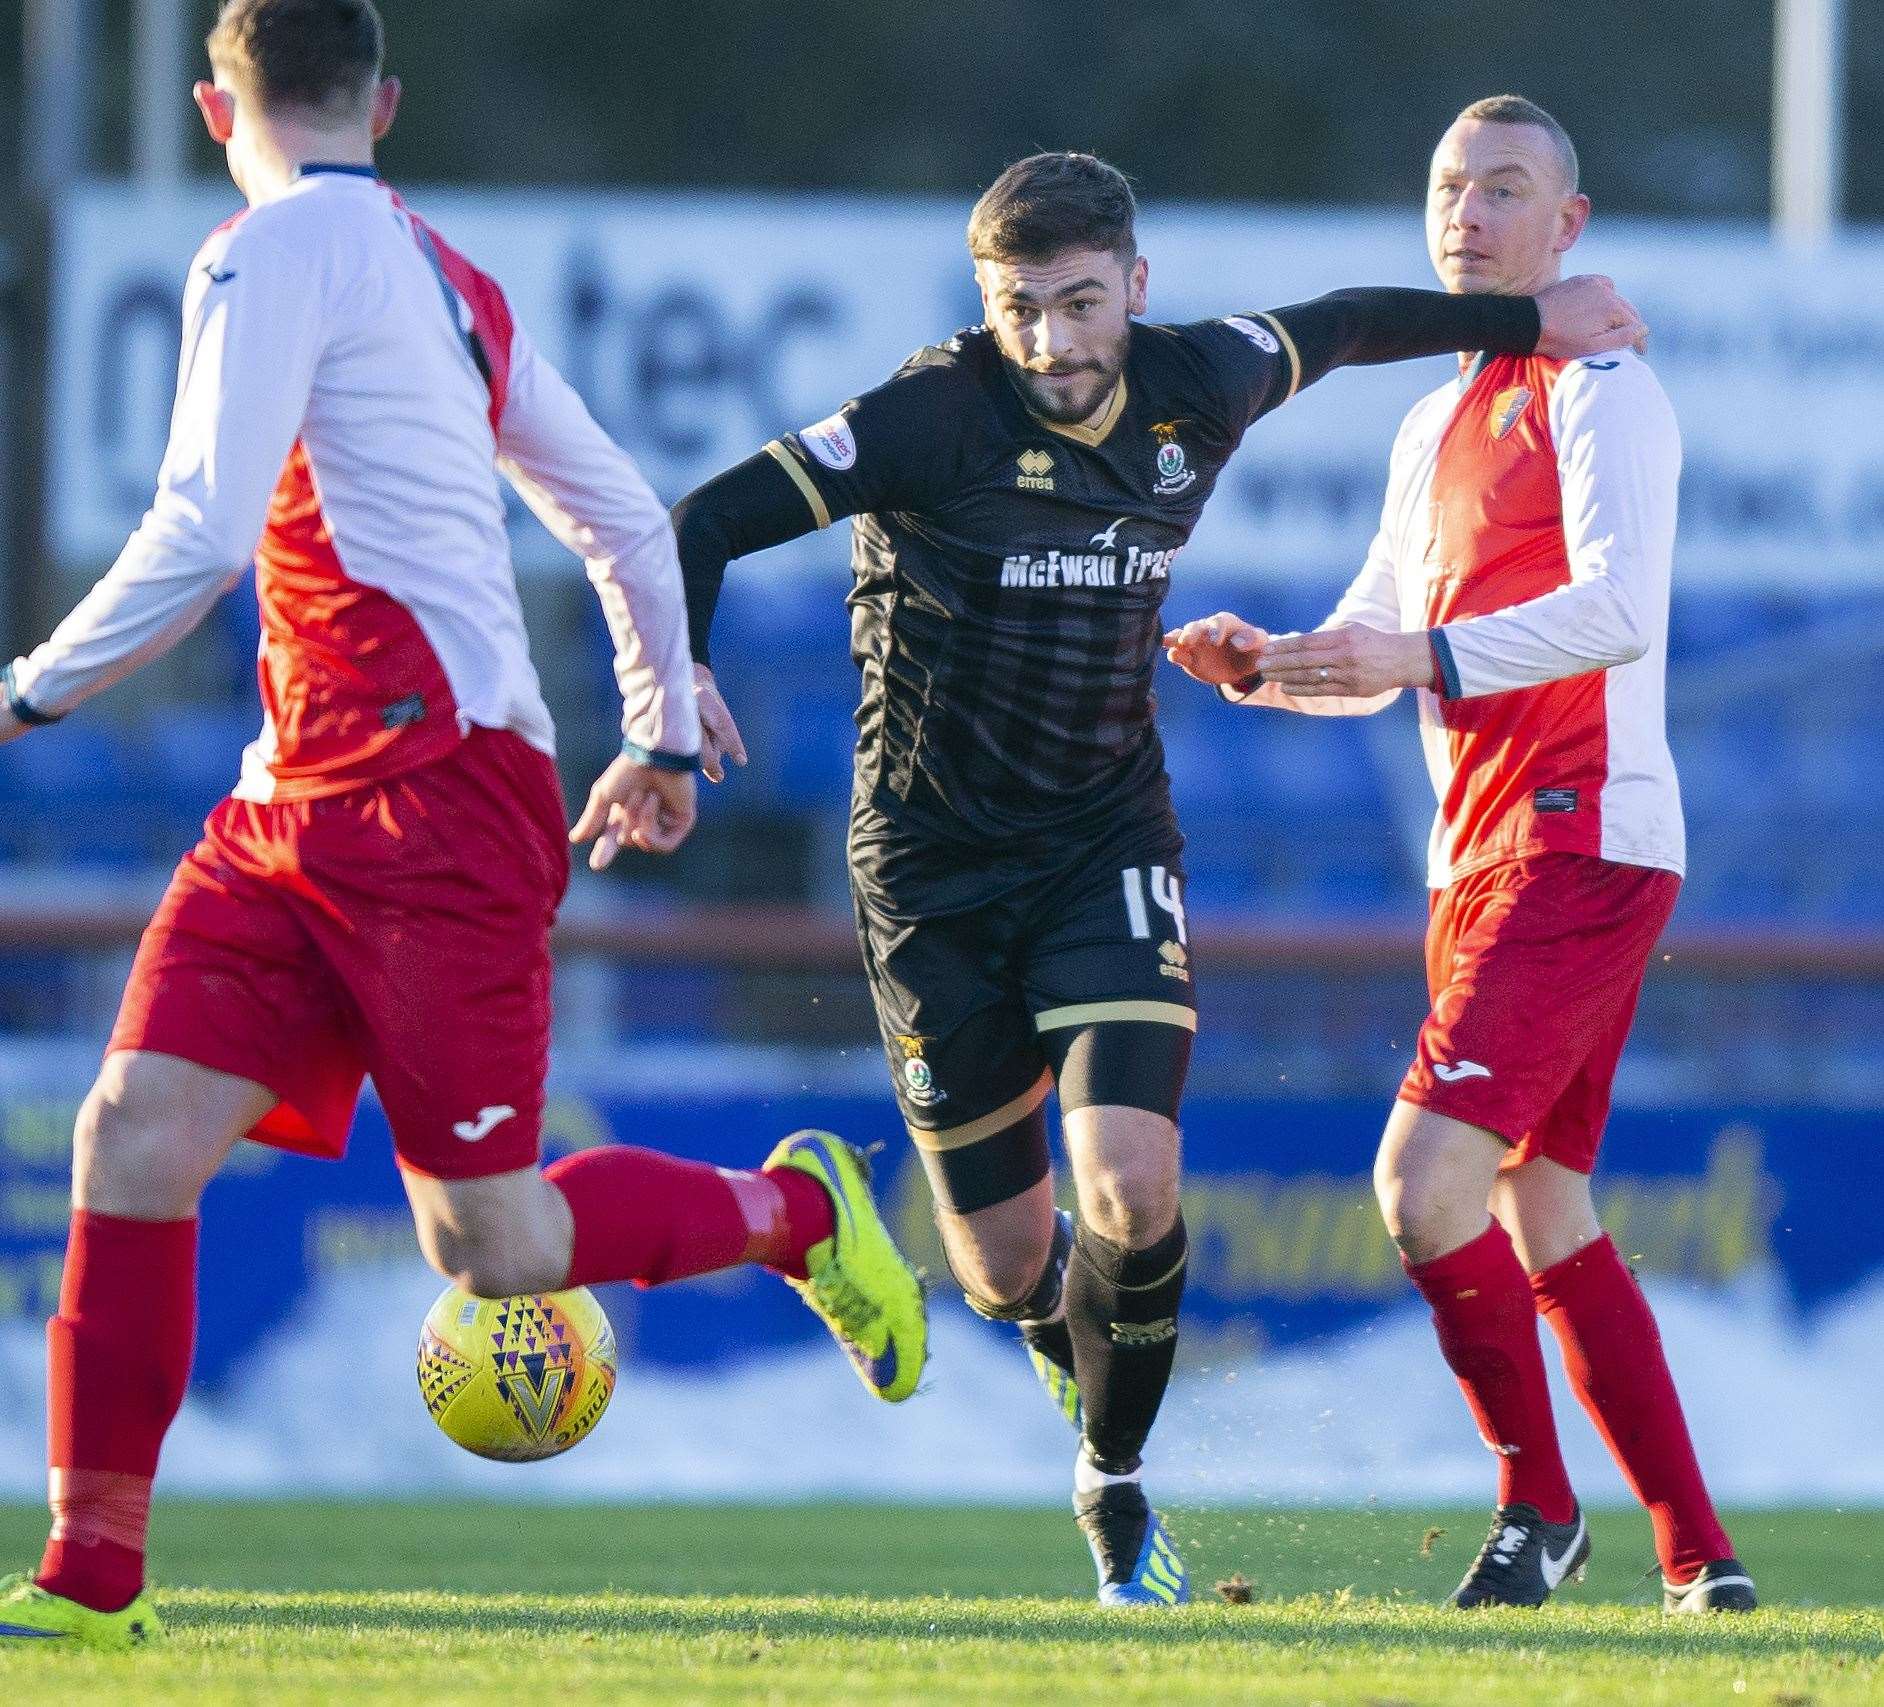 George Oakley returns to Inverness Caledonian Thistle.